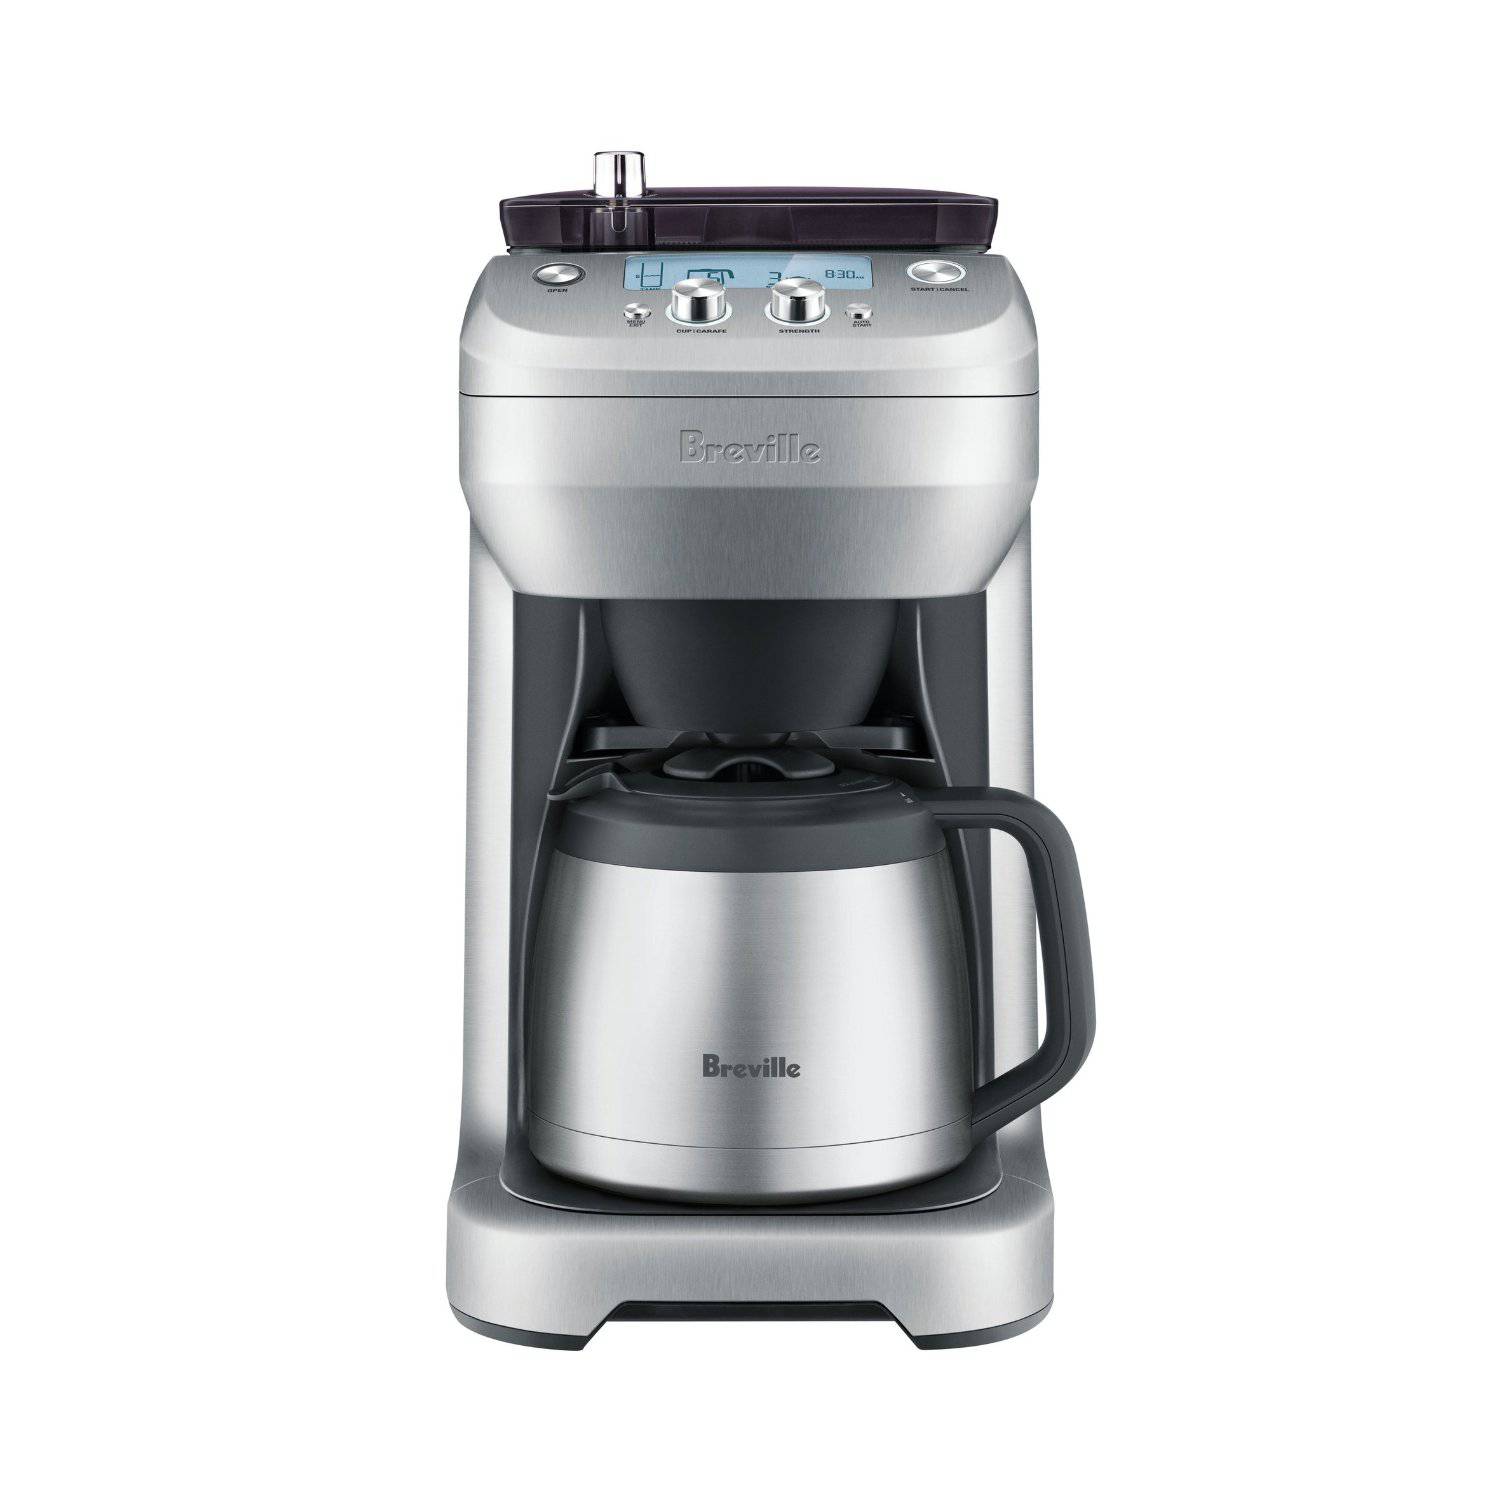 Breville BDC650BSS Grind Control, Silver